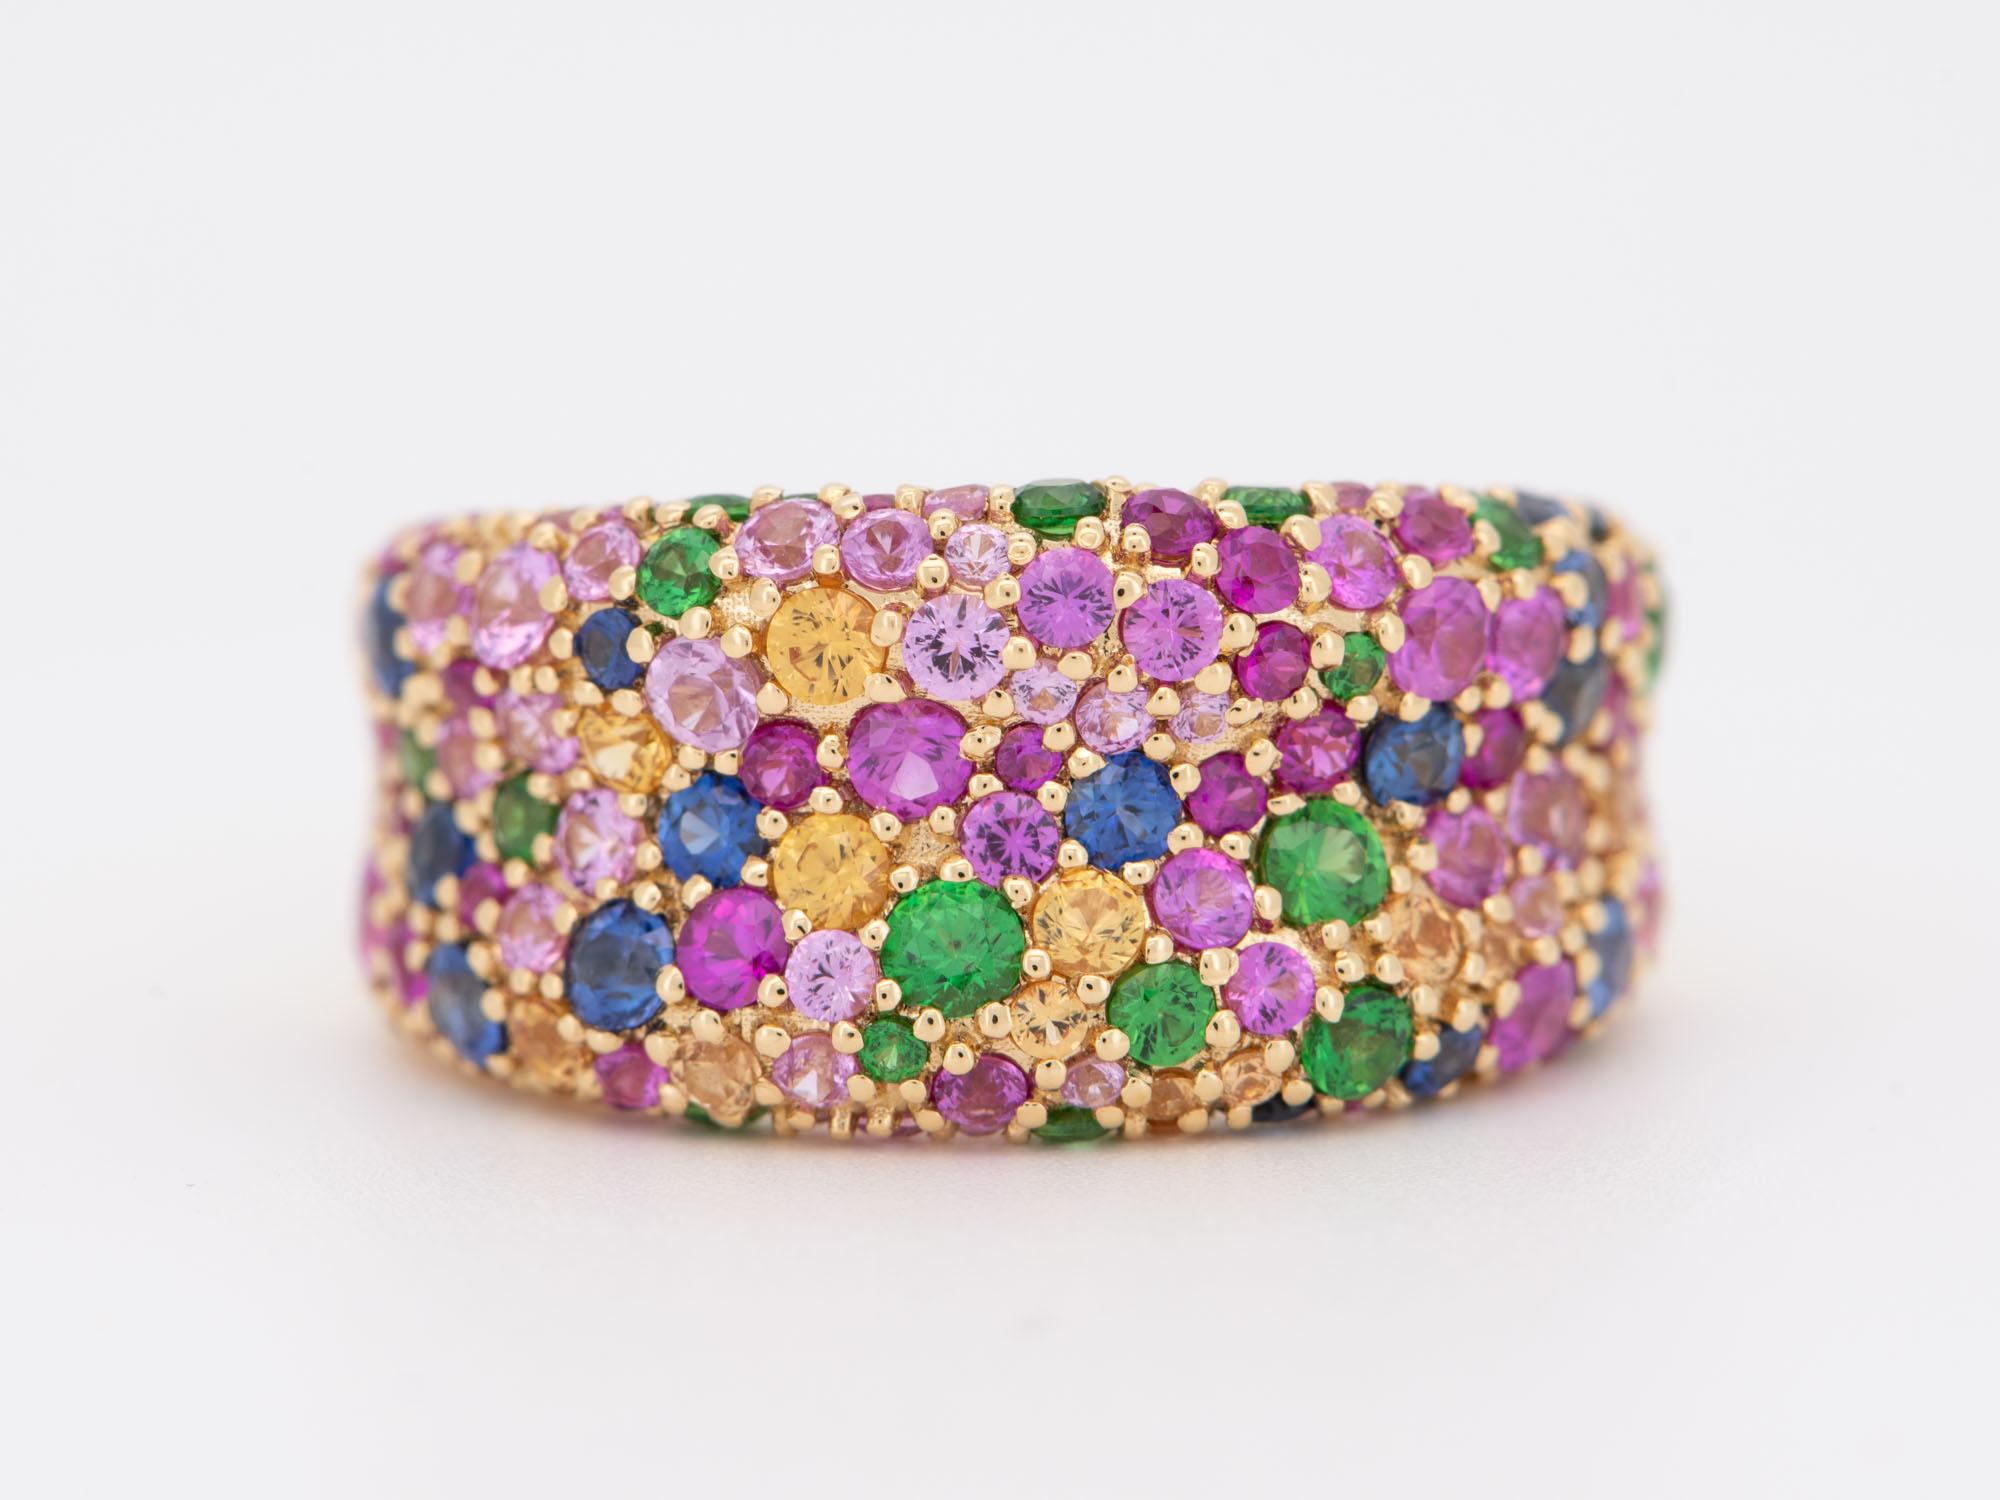 ♥ 10mm Wide Mixed Bright Gemstone Pave Chunky Band 18K Gold 
♥ The item measures 10mm in length, 20mm in width, and 4mm in thickness. Band width is 5.8mm.

♥ Ring size: US Size 6 (Free resizing up or down 1 size)
♥ Material: 18K Gold, size 6 weighs